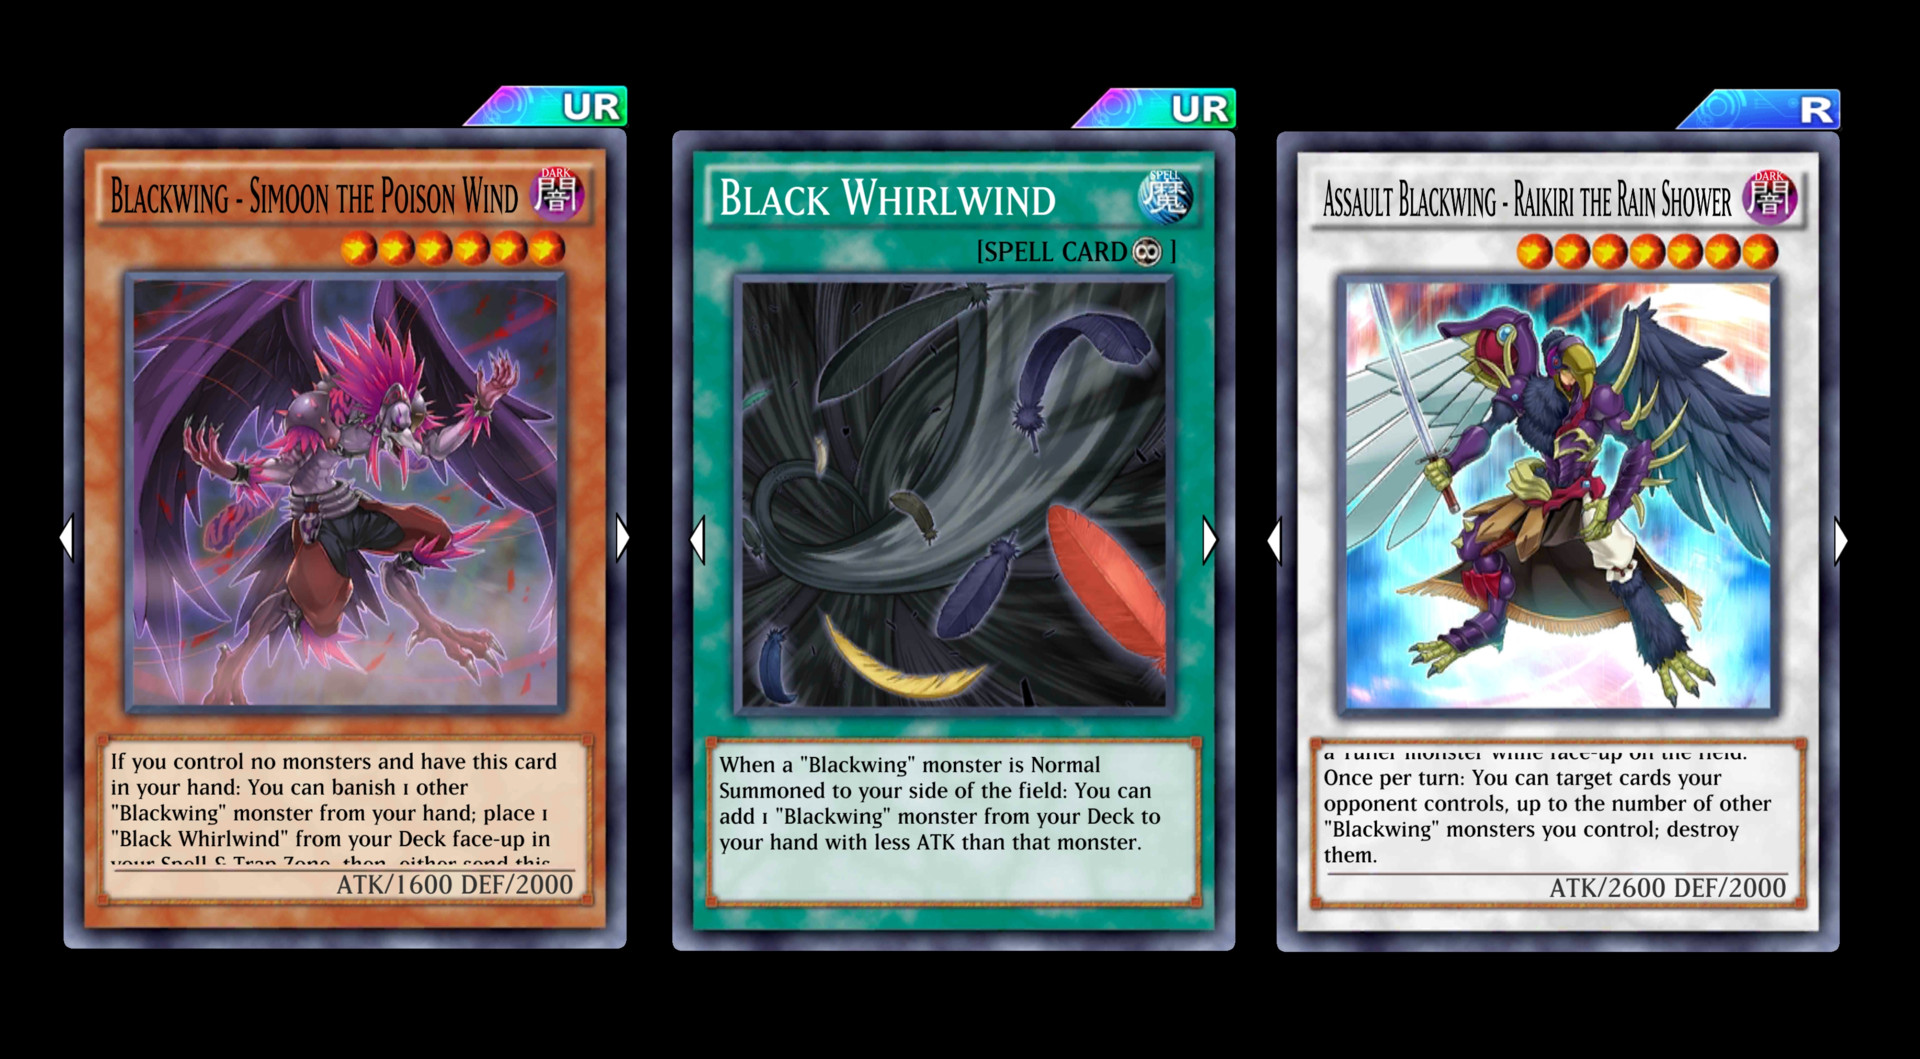 Blackwing core cards